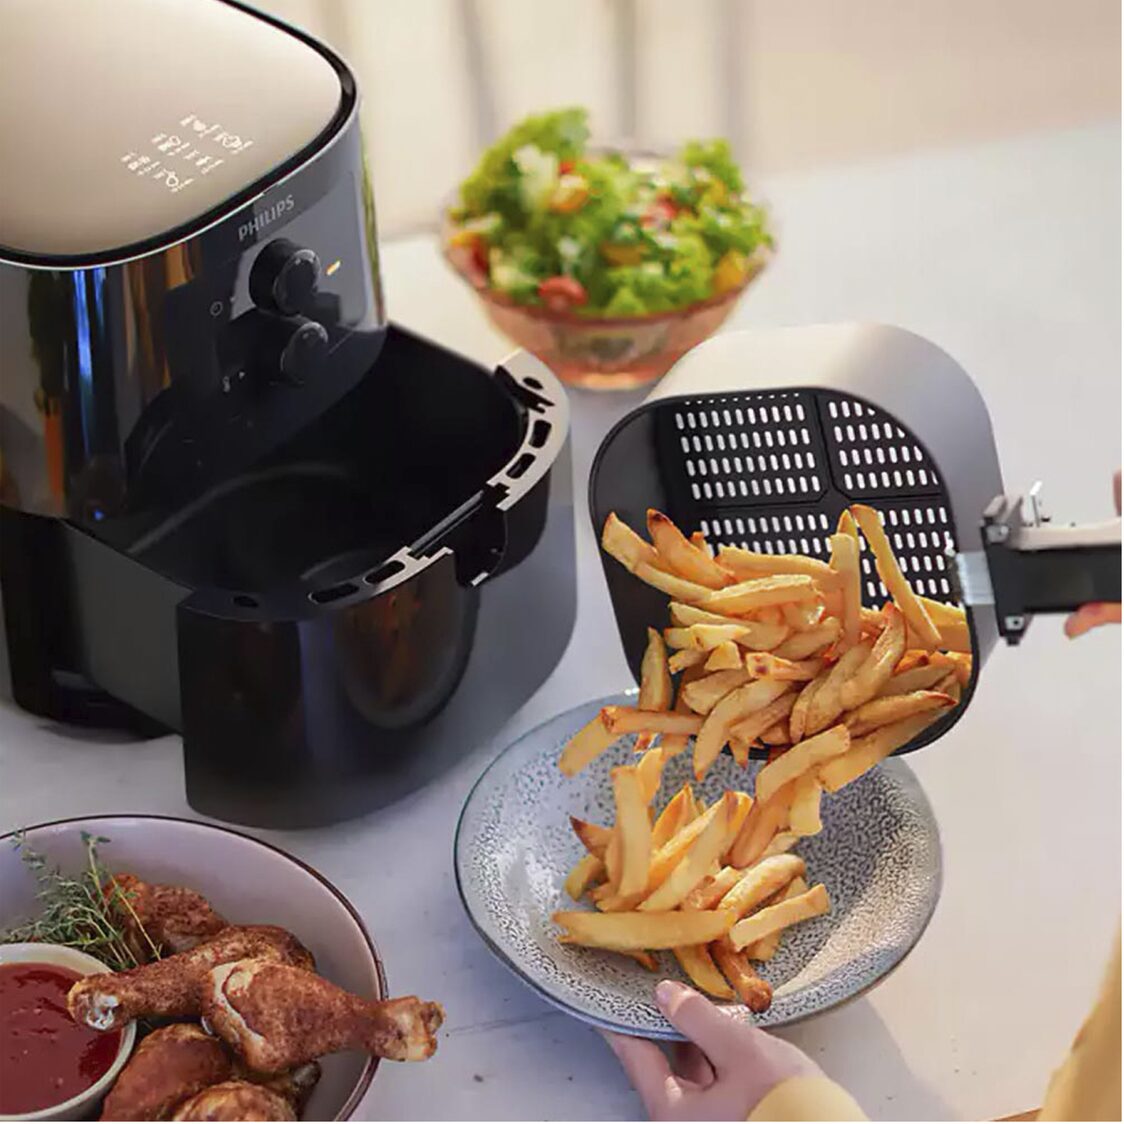 Philips Airfryer XL with Rapid Air technology 